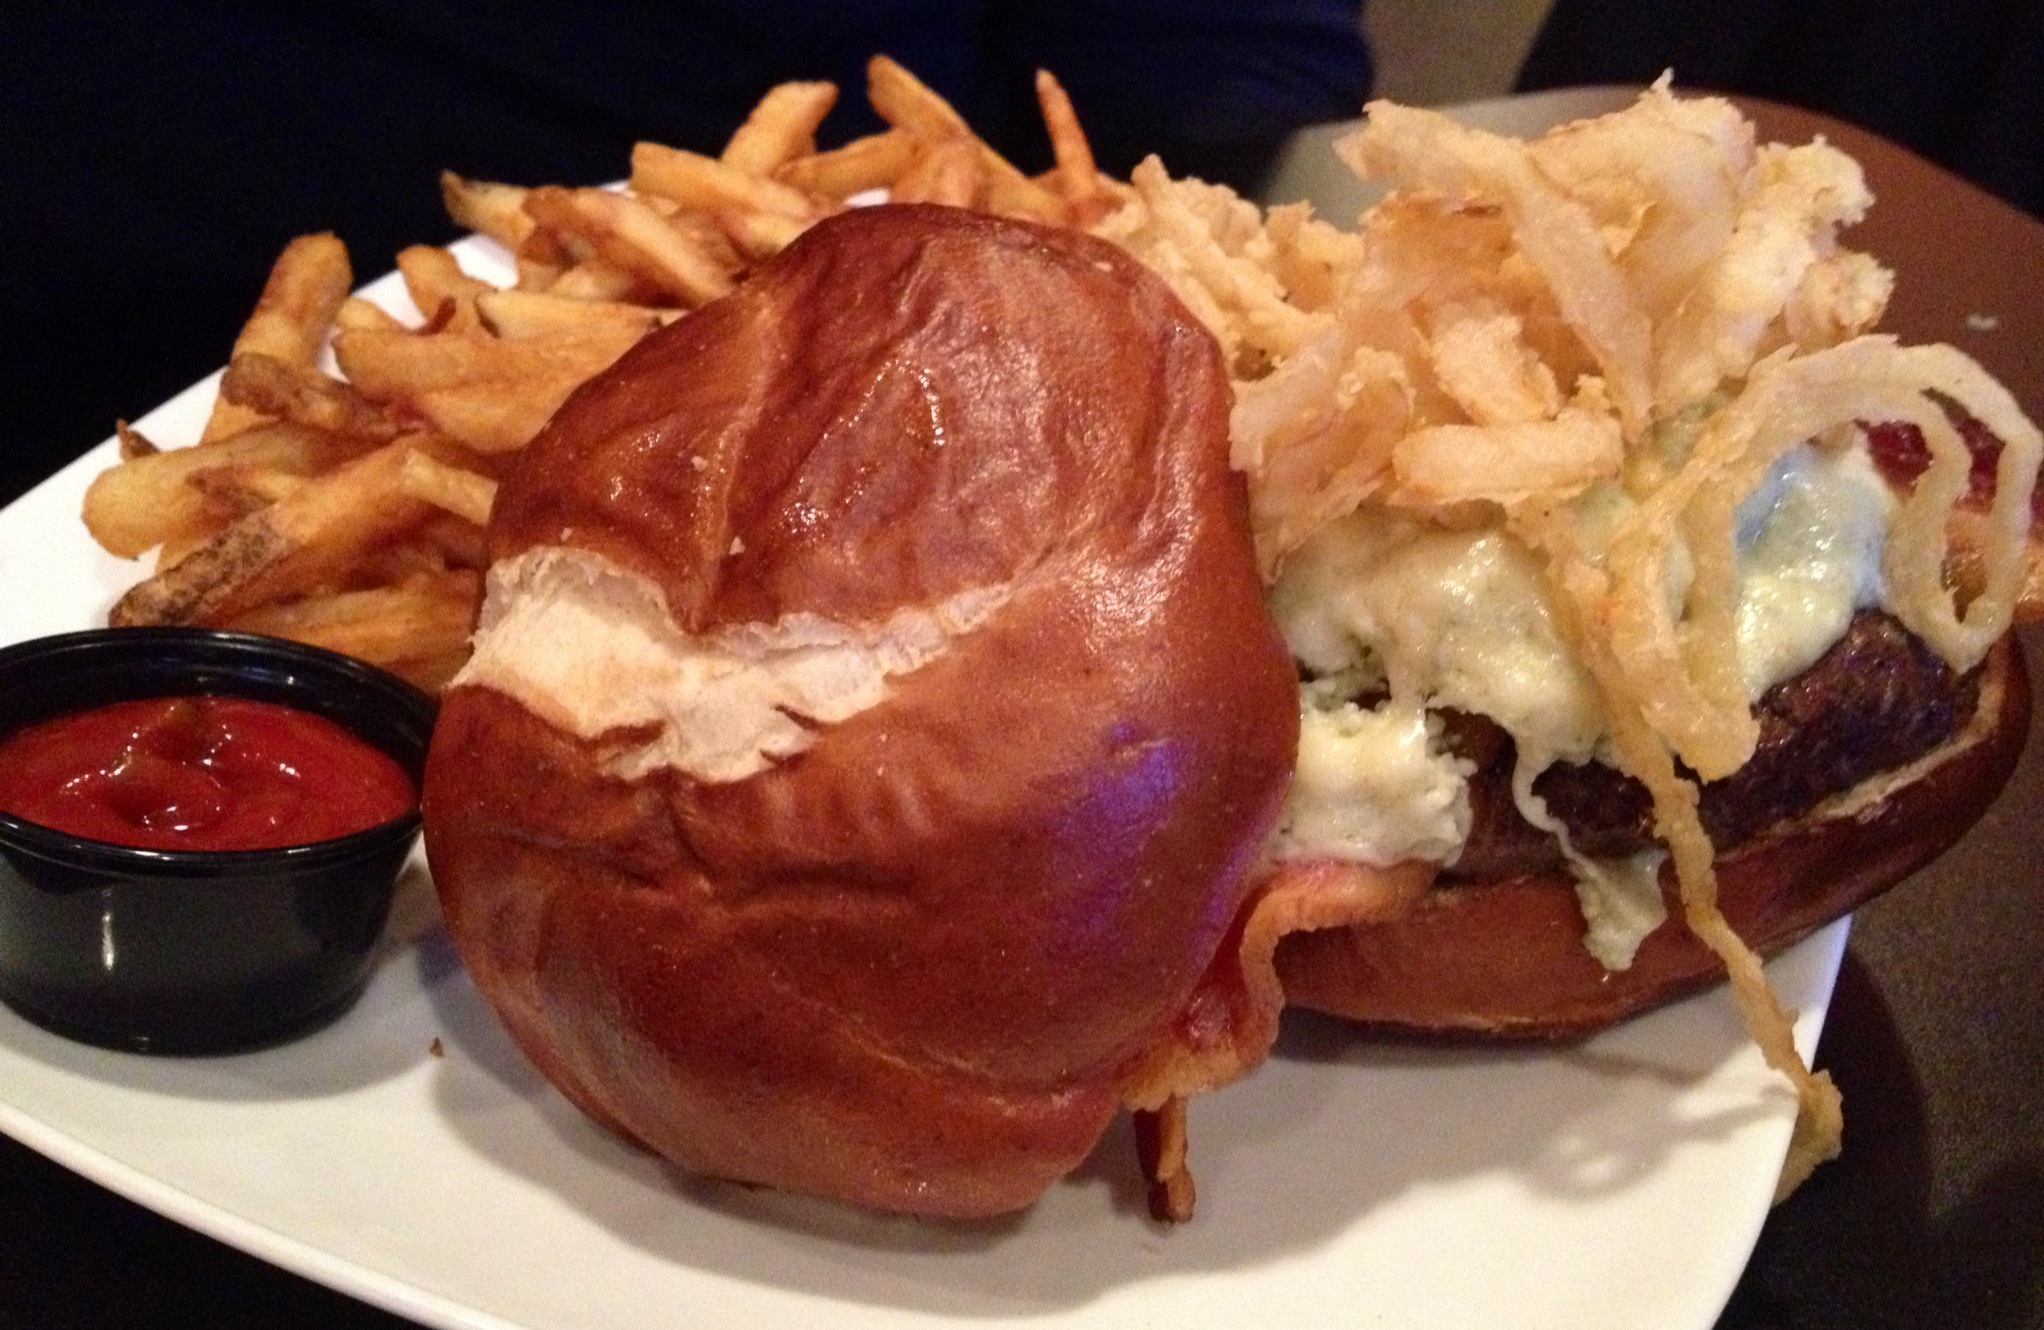 Kaijo Burger: Thick and juicy patty, bacon, bleu cheese, and frizzled onions.